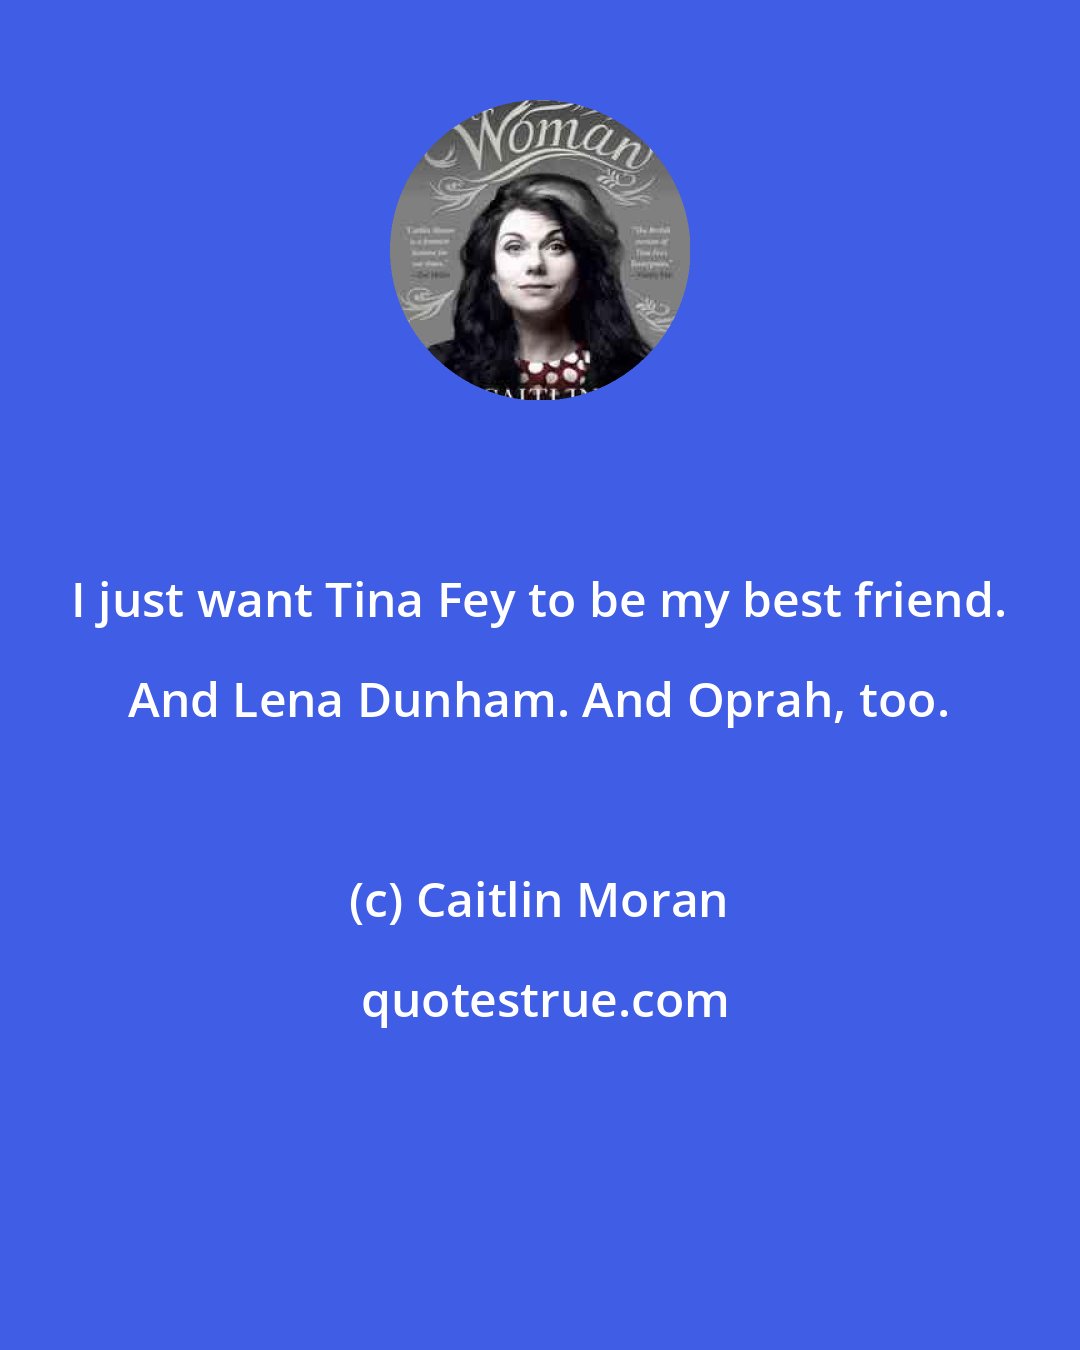 Caitlin Moran: I just want Tina Fey to be my best friend. And Lena Dunham. And Oprah, too.